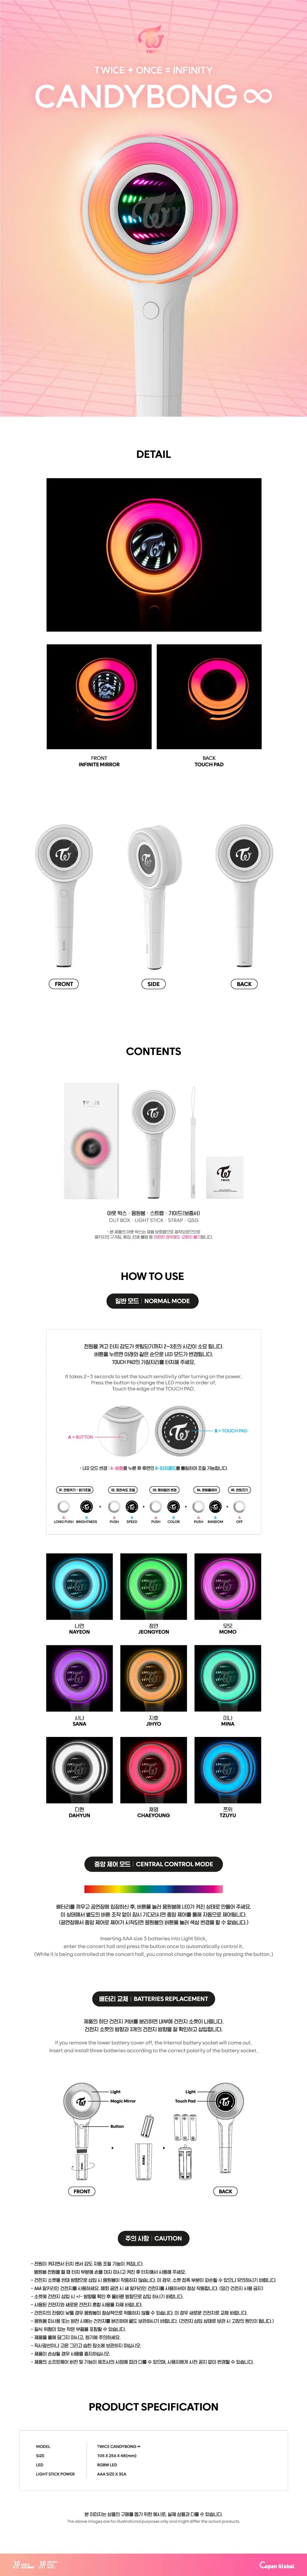 TWICE OFFICIAL LIGHT STICK VER.3 'CANDYBONG INFINITY' DETAIL